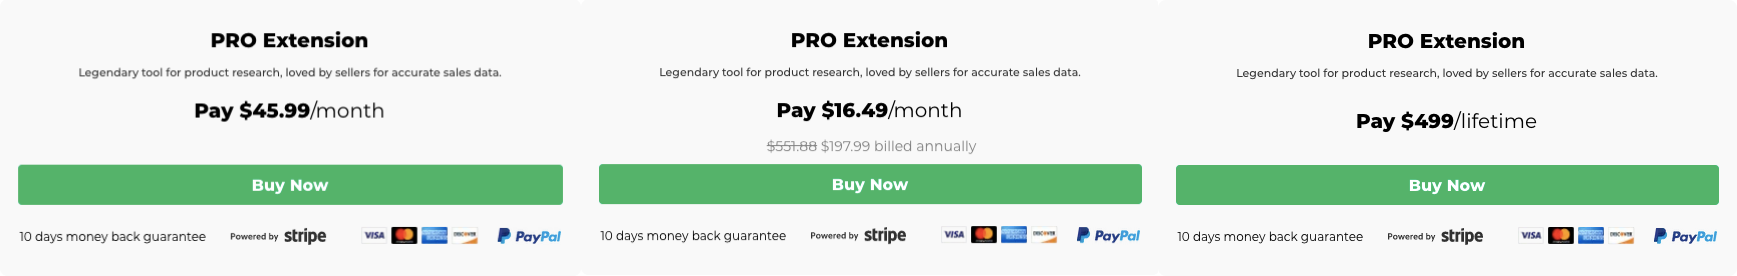 amzscout pro extension pricing